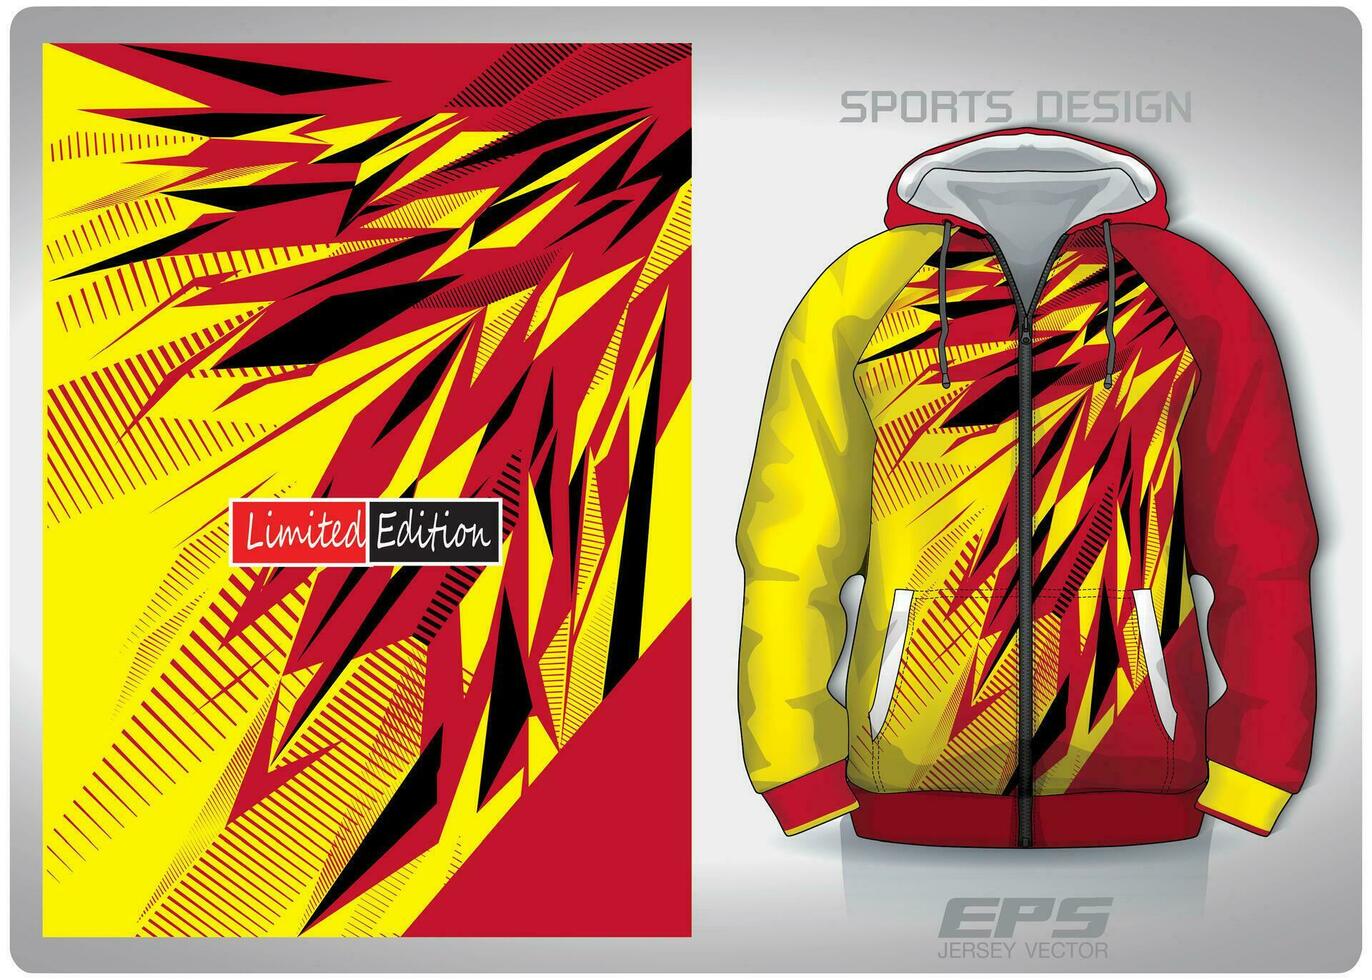 Vector sports shirt background image.red and yellow broken glass pattern design, illustration, textile background for sports long sleeve hoodie, jersey hoodie